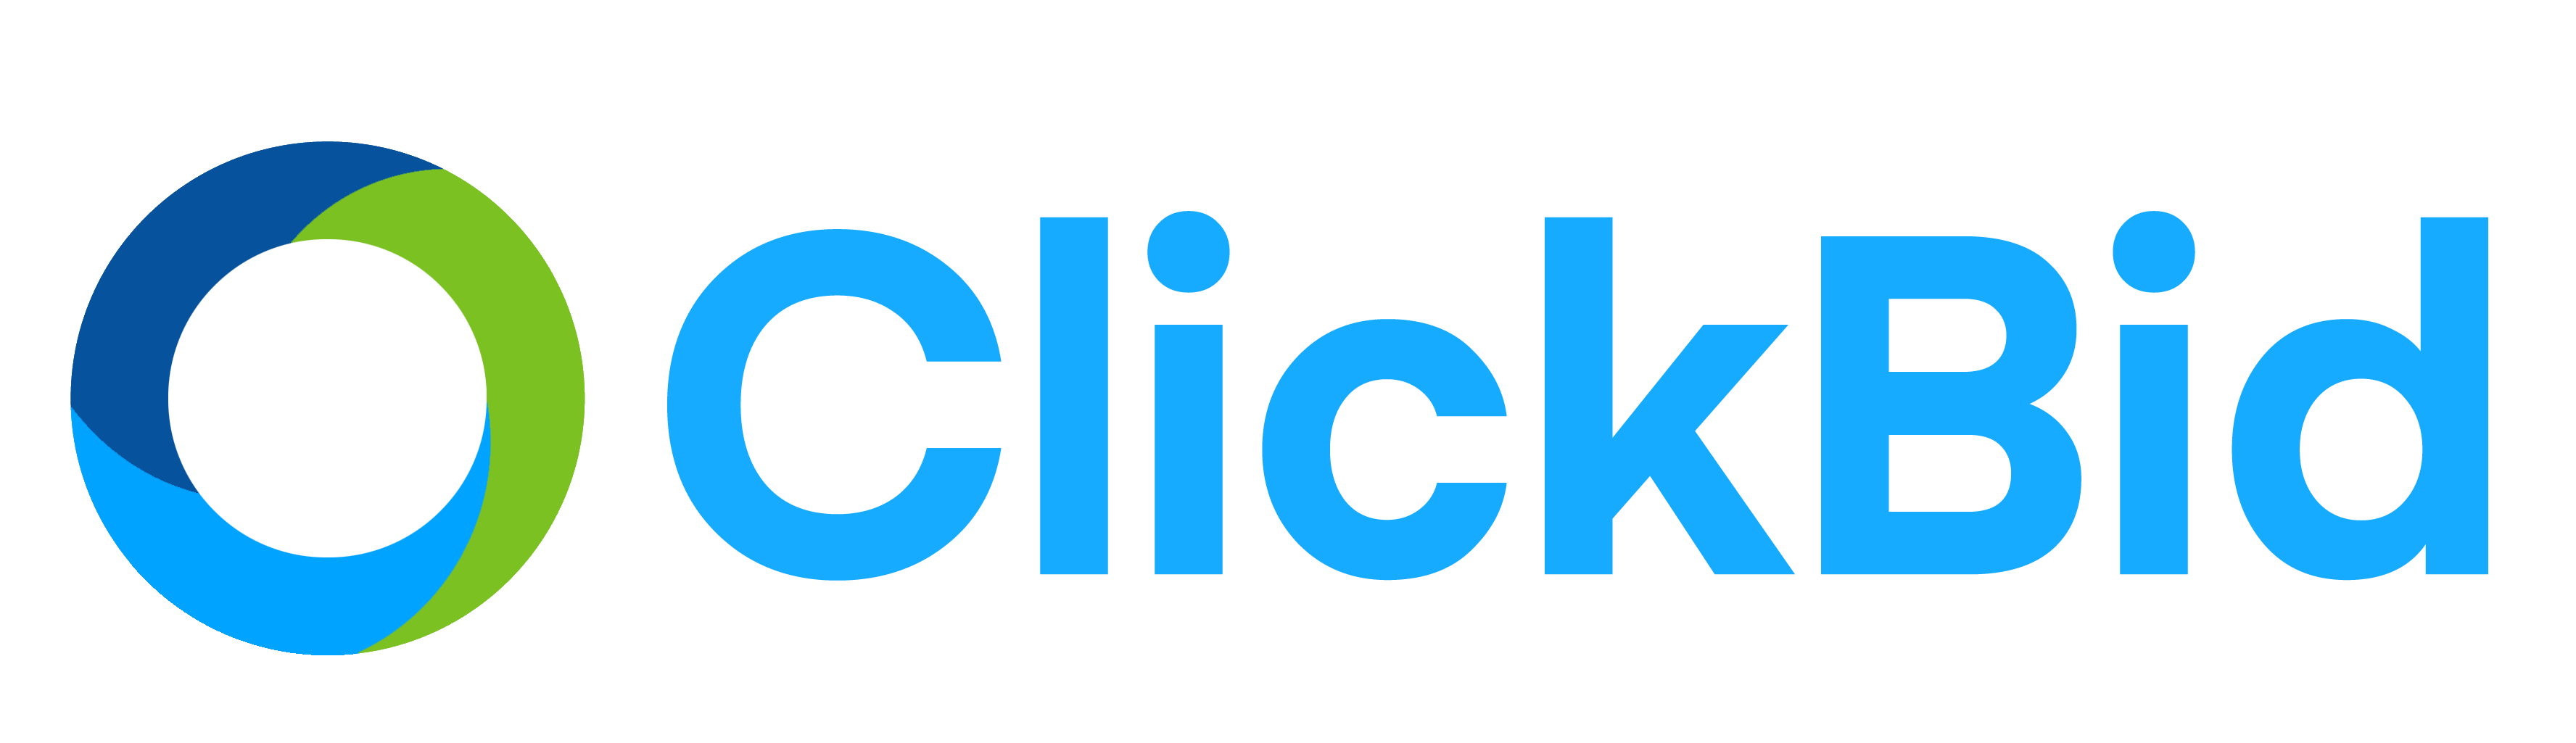 The logo for ClickBid, a top charity auction site